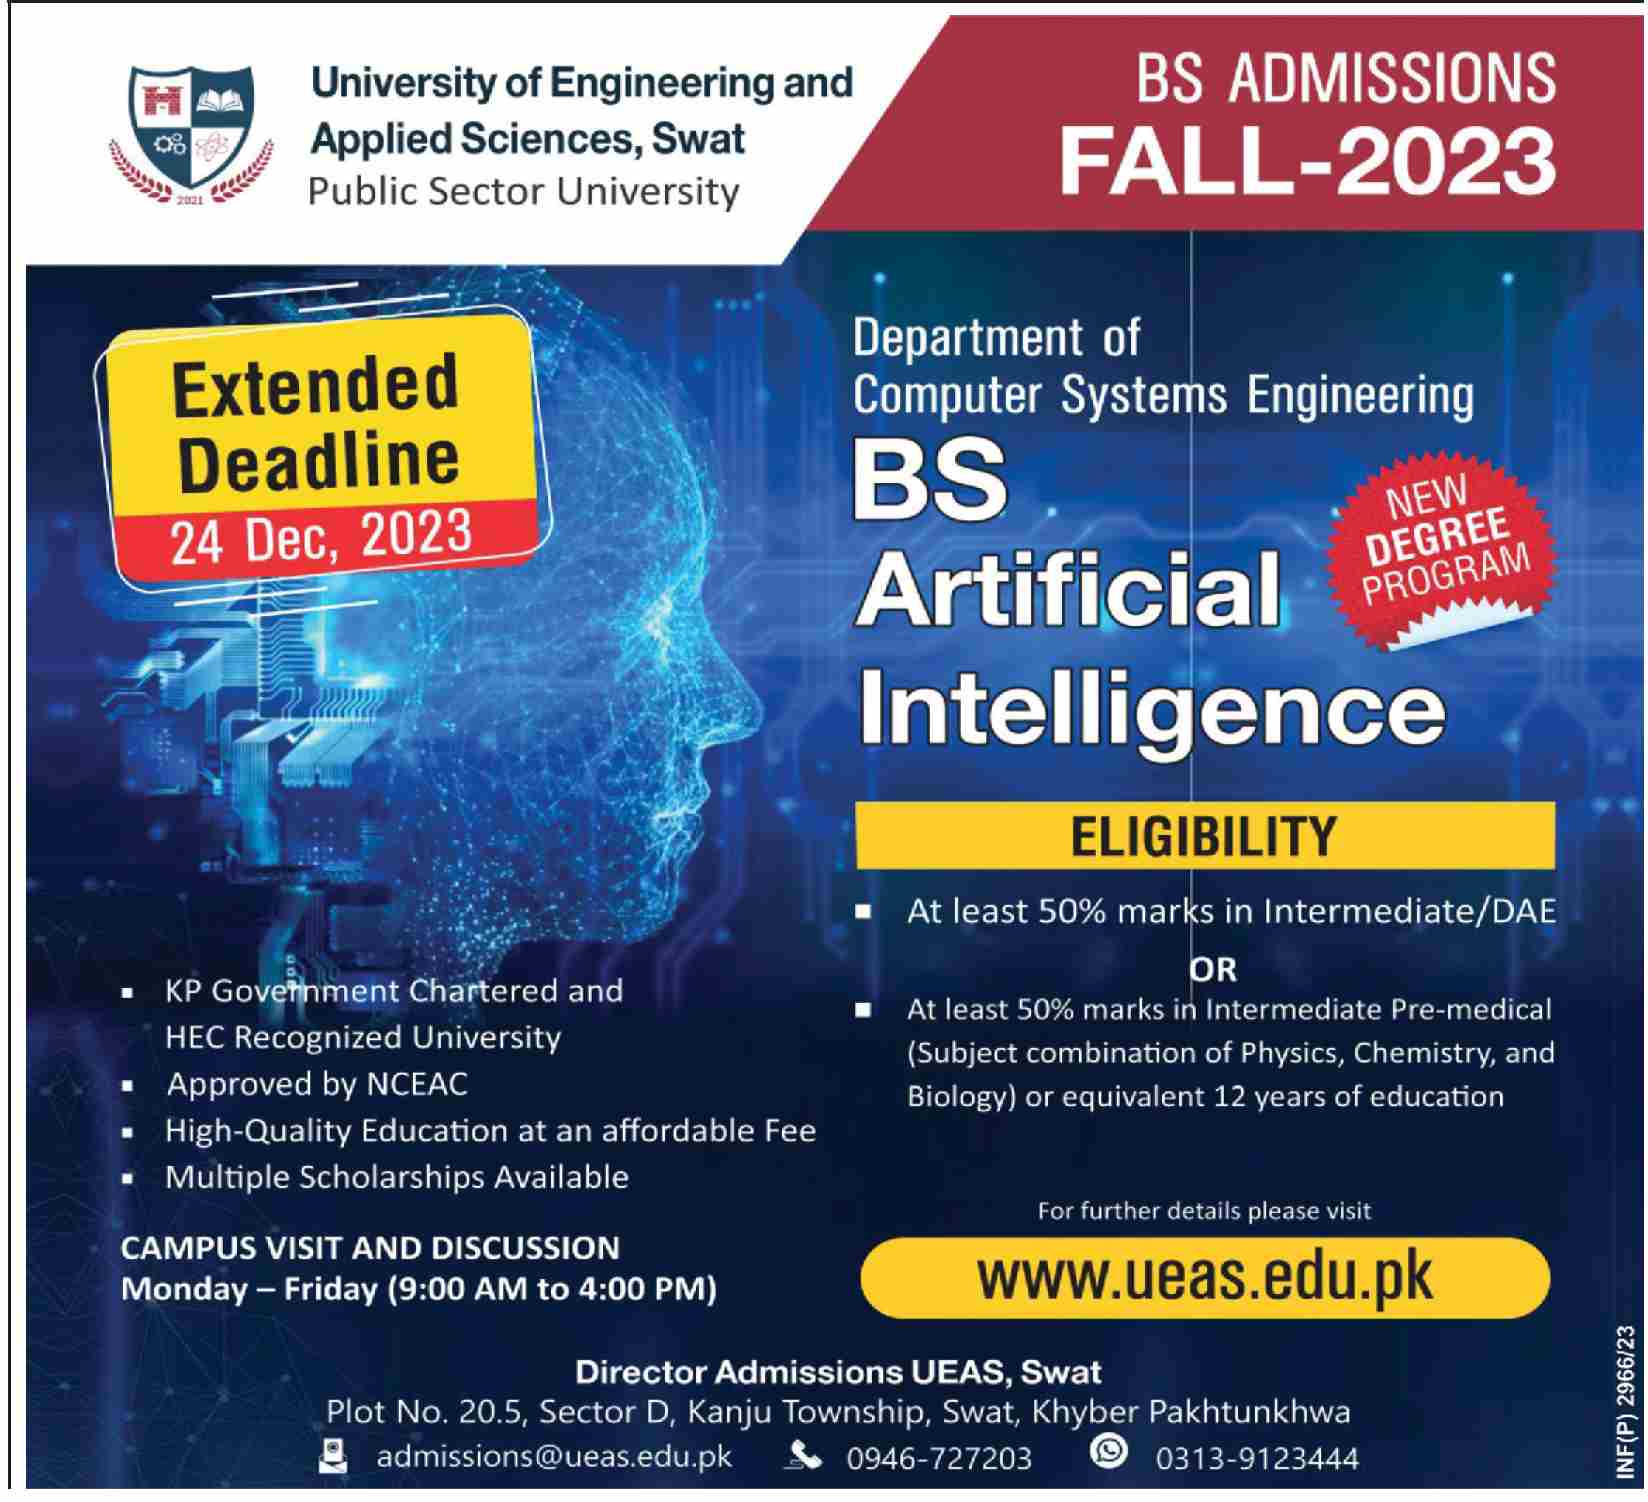 UEAS BS Admissions Fall 2023 BS Artificial Intelligence